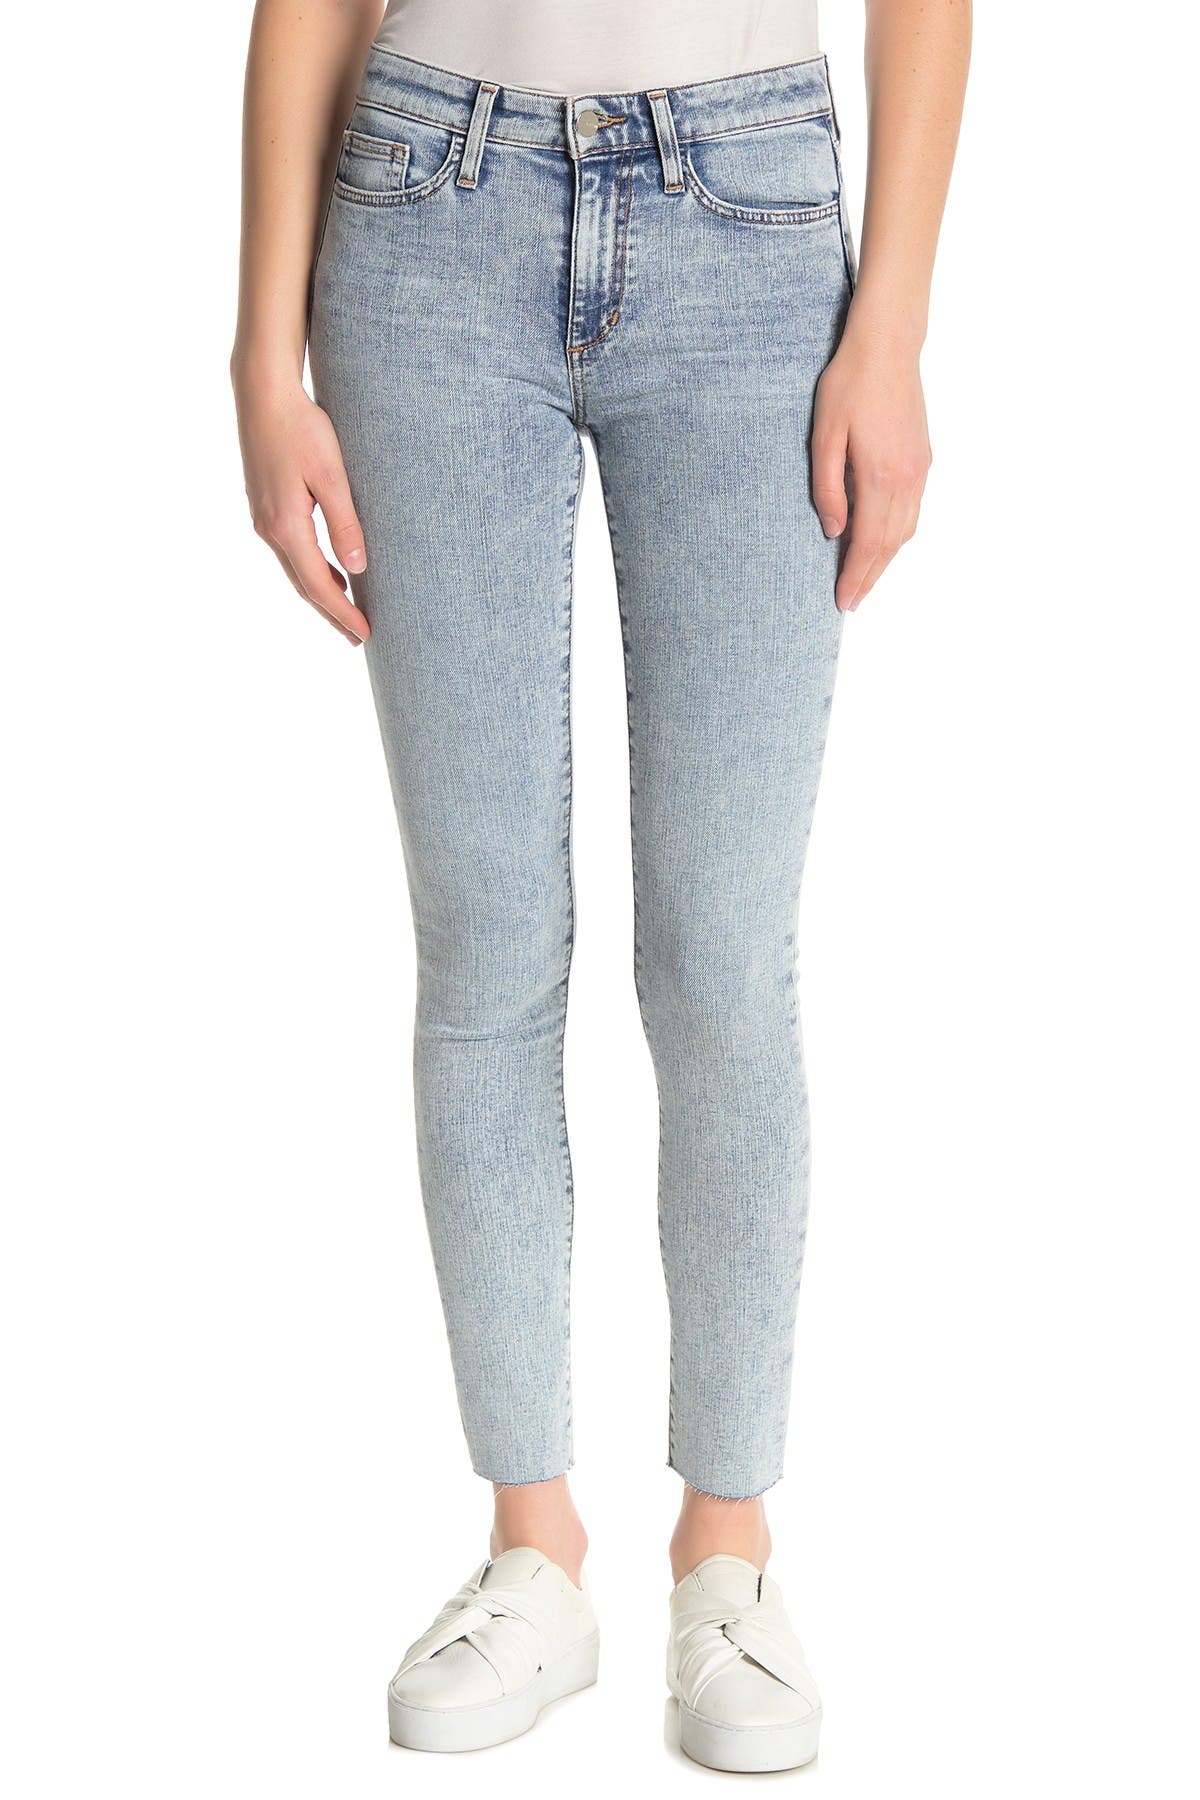 joe's jeans the icon mid rise skinny